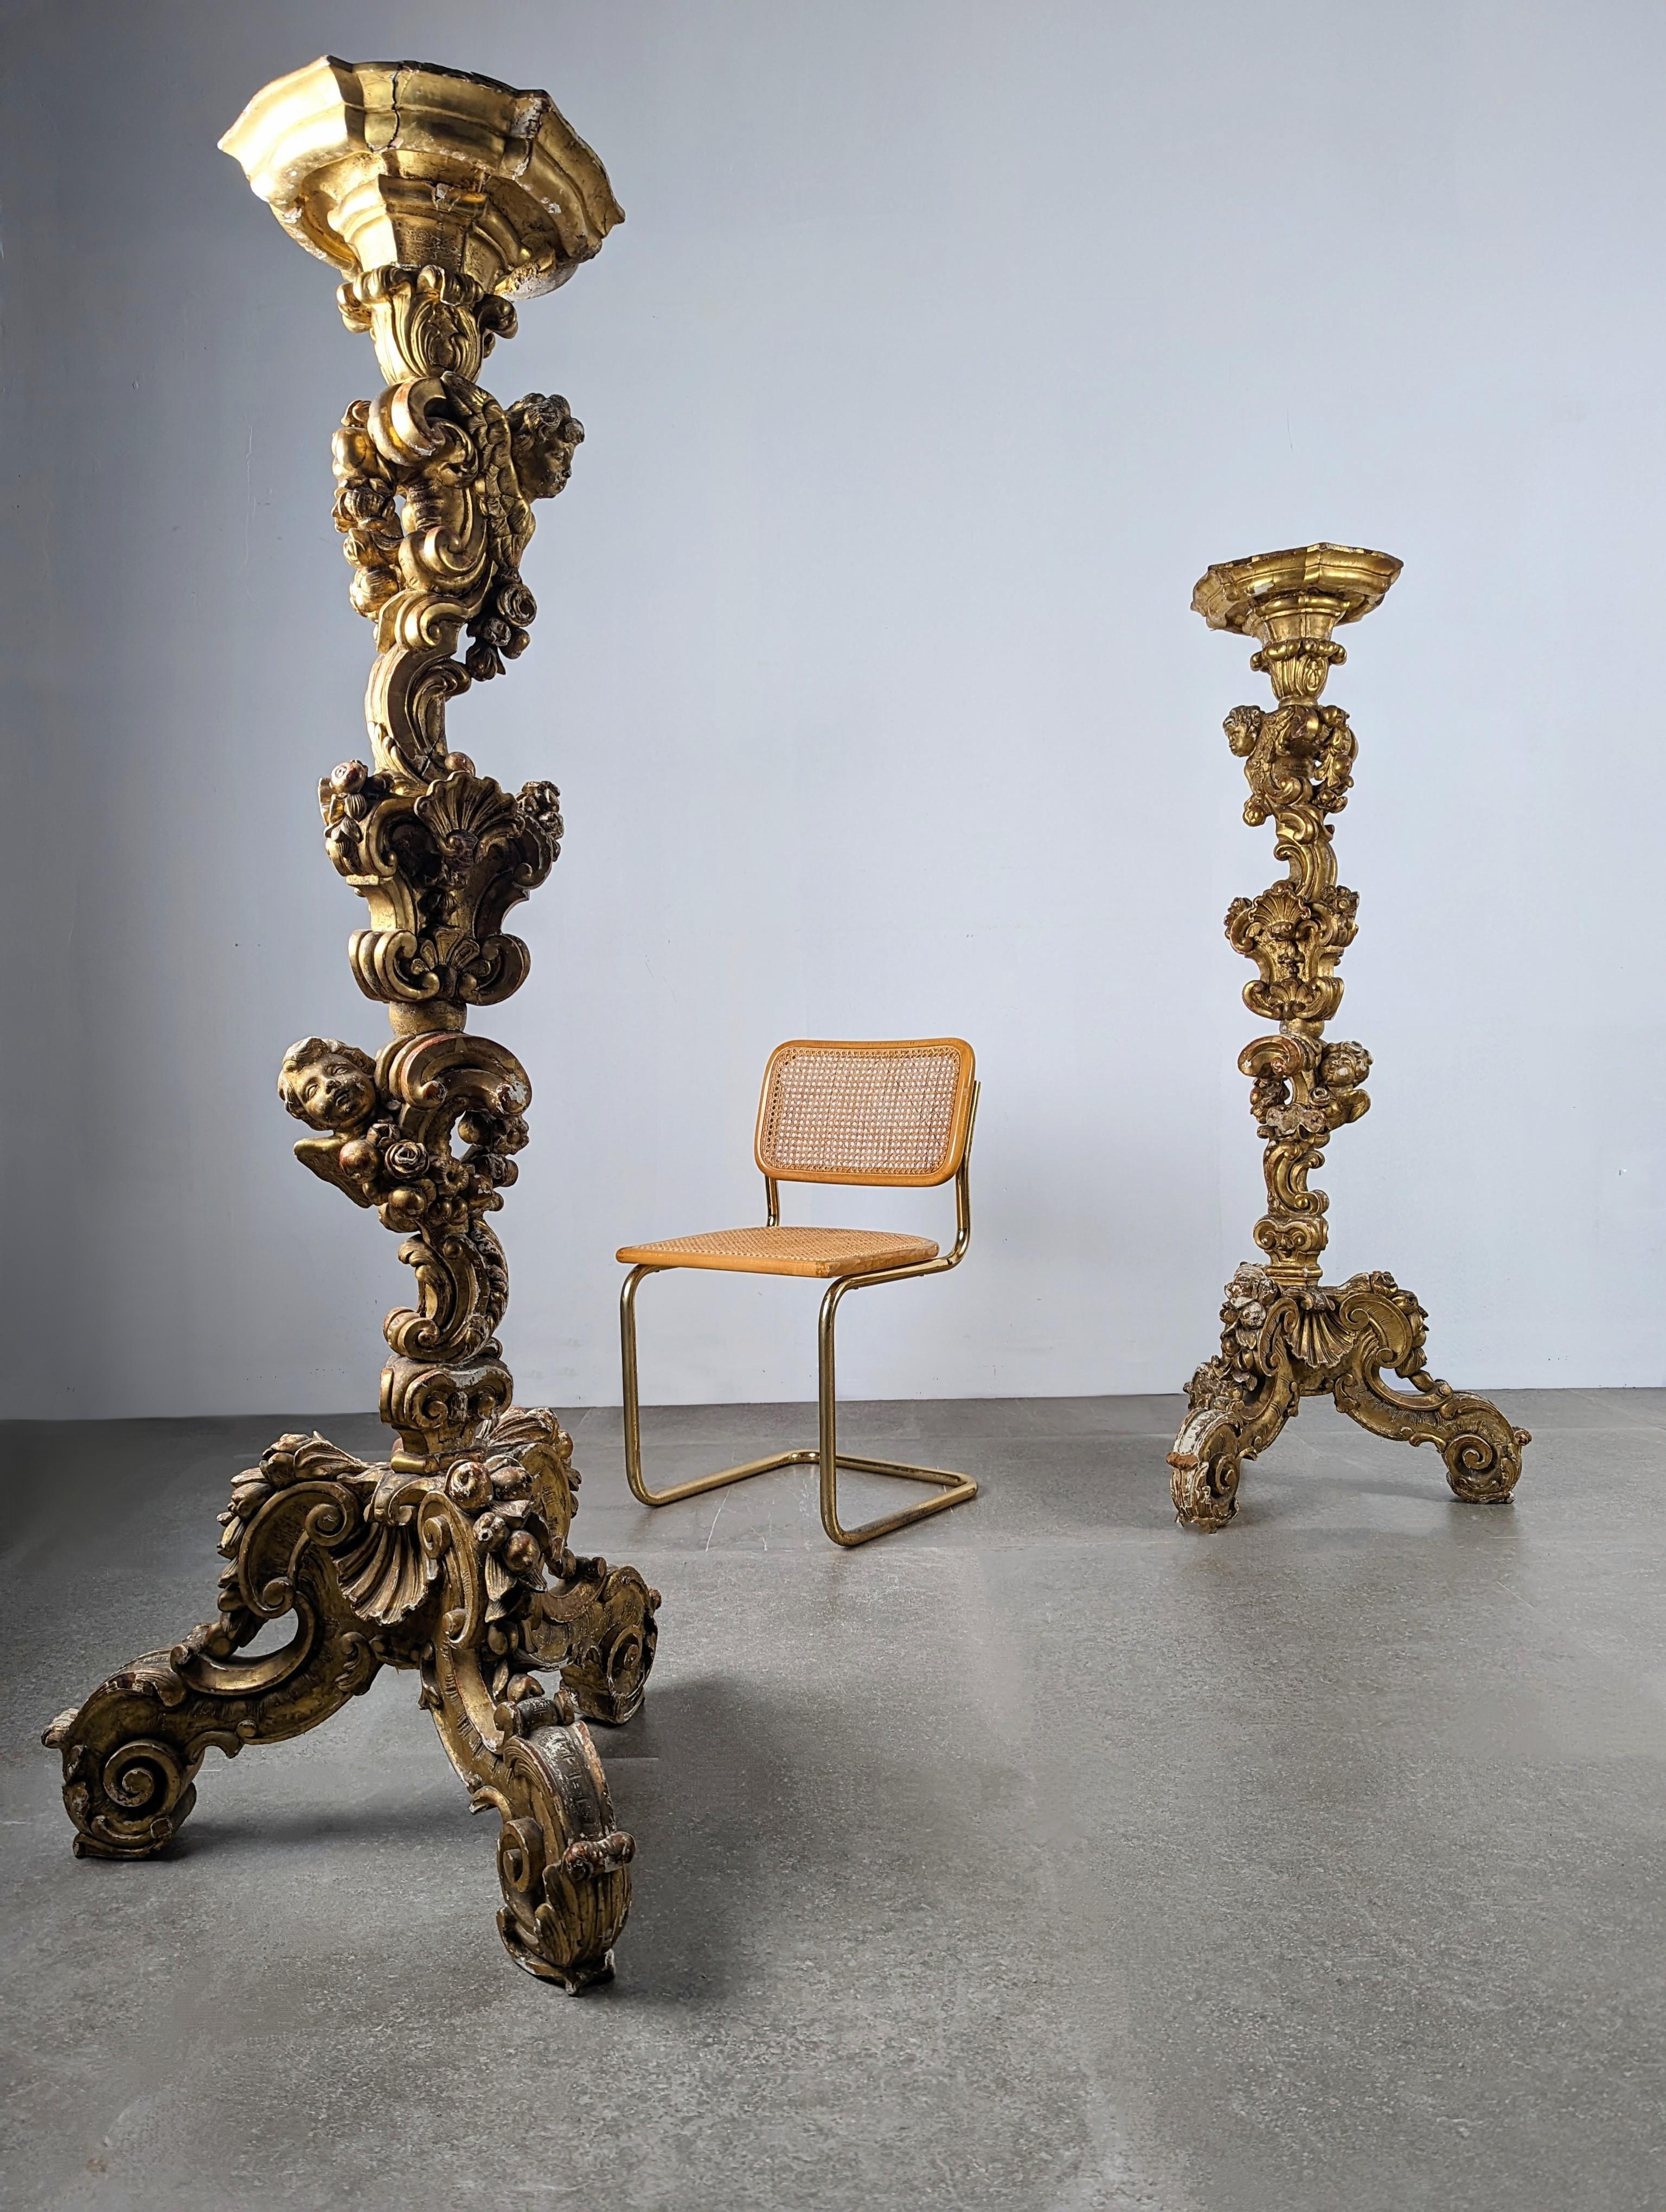 This impressive pair of 19th century Italian torches are a sublime work of European Baroque art. Carved in golden wood, it gives us an exquisite decoration of angels among fruits and shells, uniquely representing unparalleled strength and